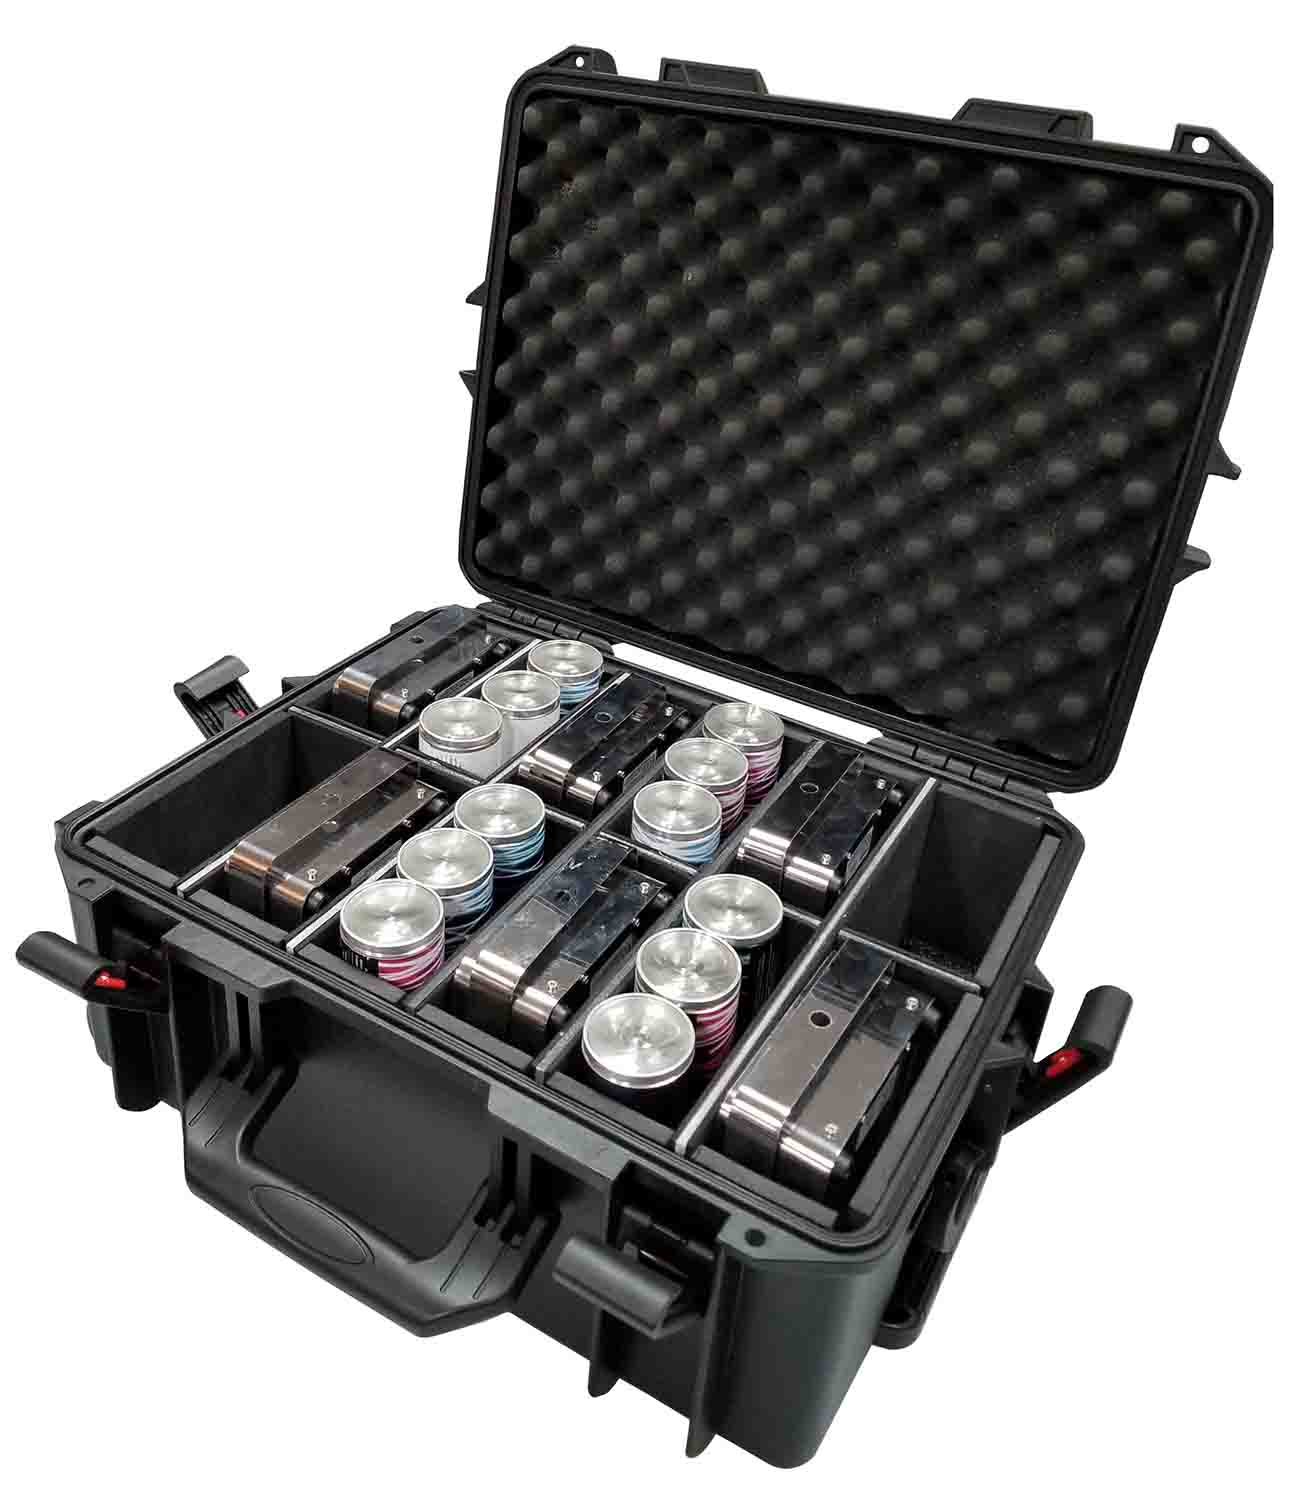 ProX XM-MAXI12 VaultX Watertight Case for 12 ApeLabs MAXI Lights with Extendable Handle and Wheels - Hollywood DJ